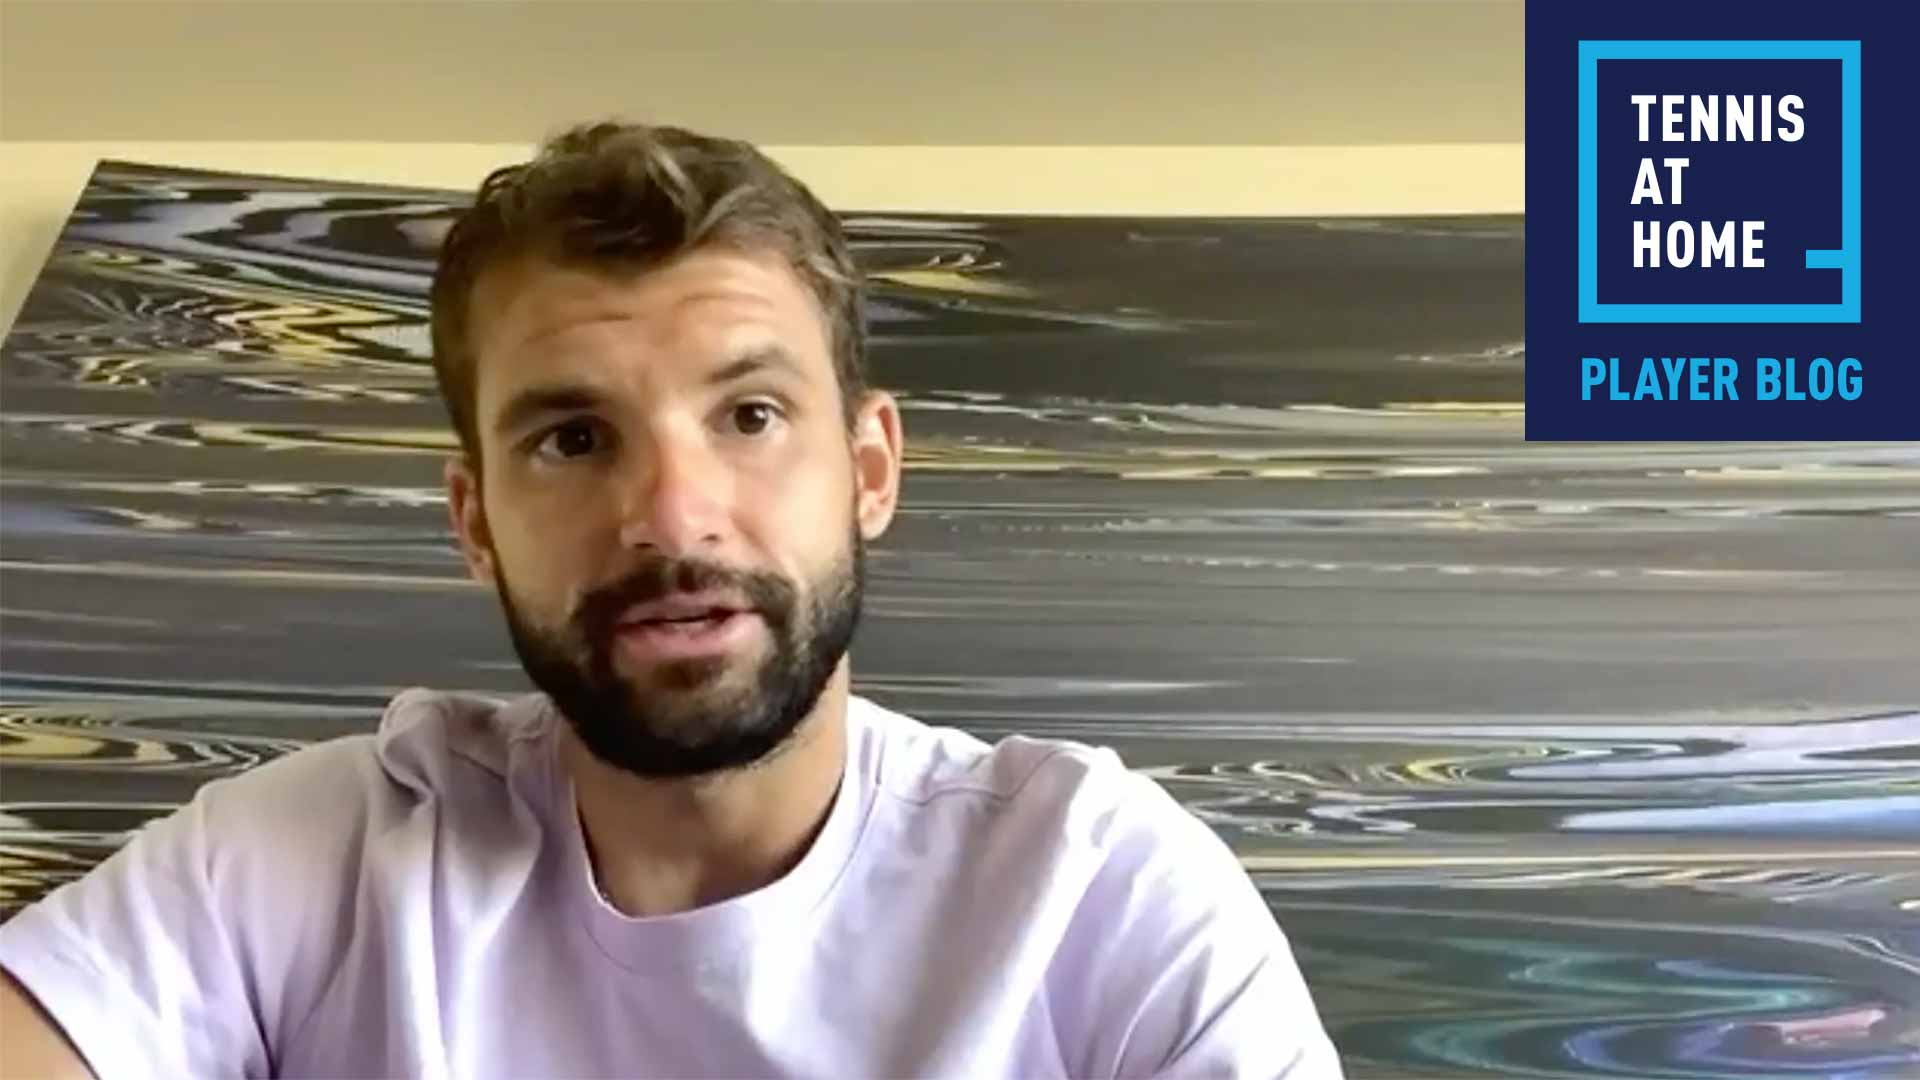 Grigor Dimitrov has been finding plenty of ways to keep busy while staying at home.